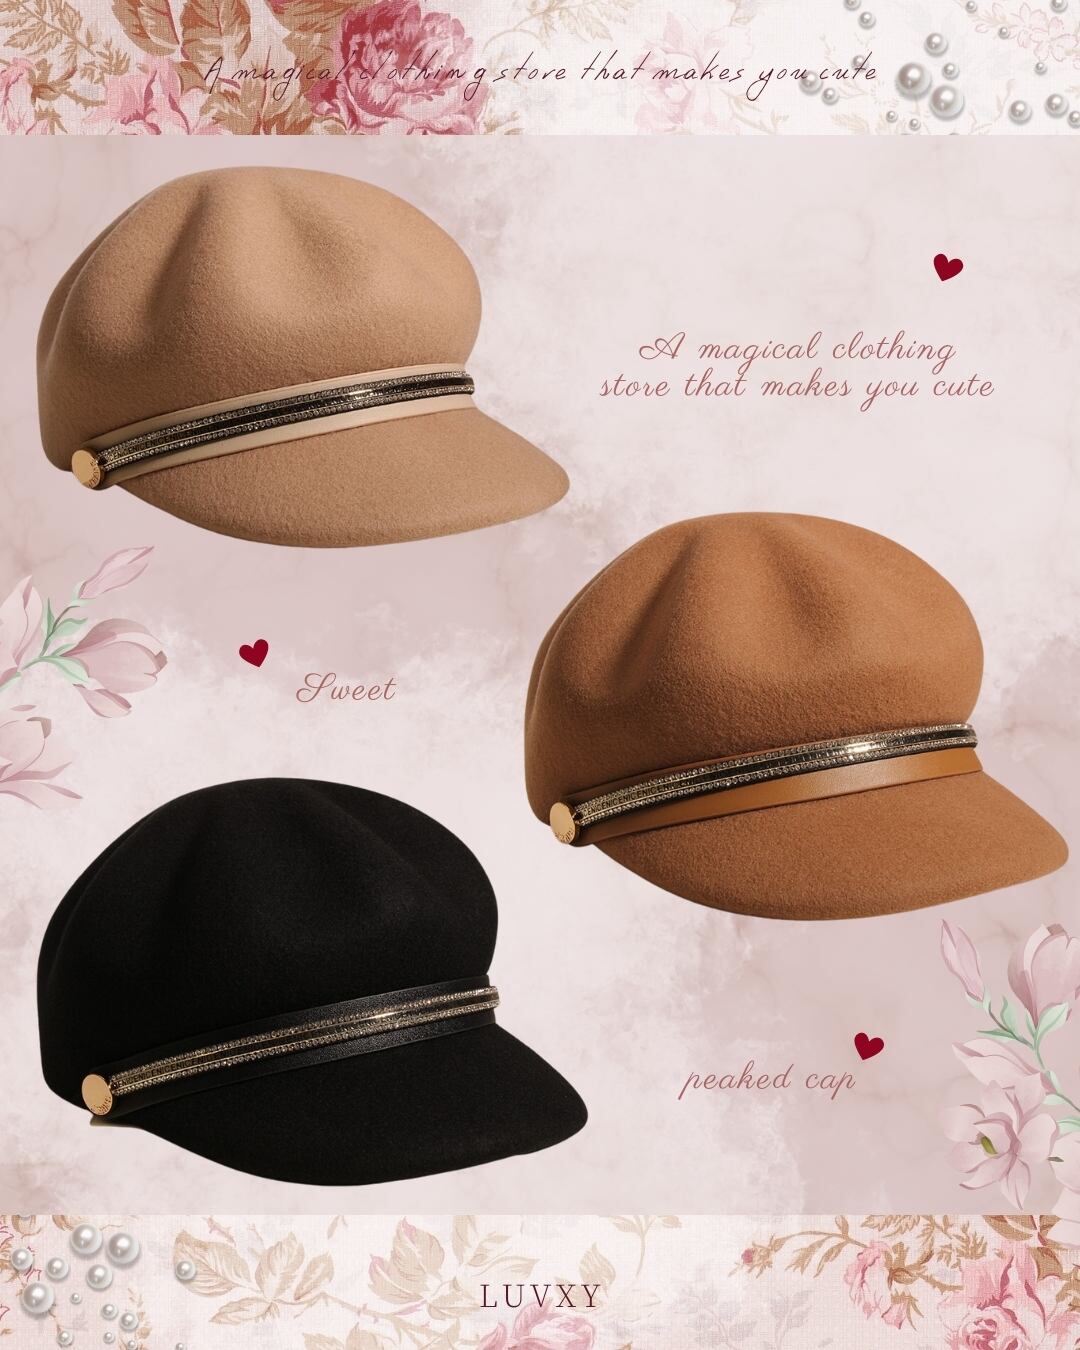 Peaked cap♡Q663 | luvxy powered by BASE